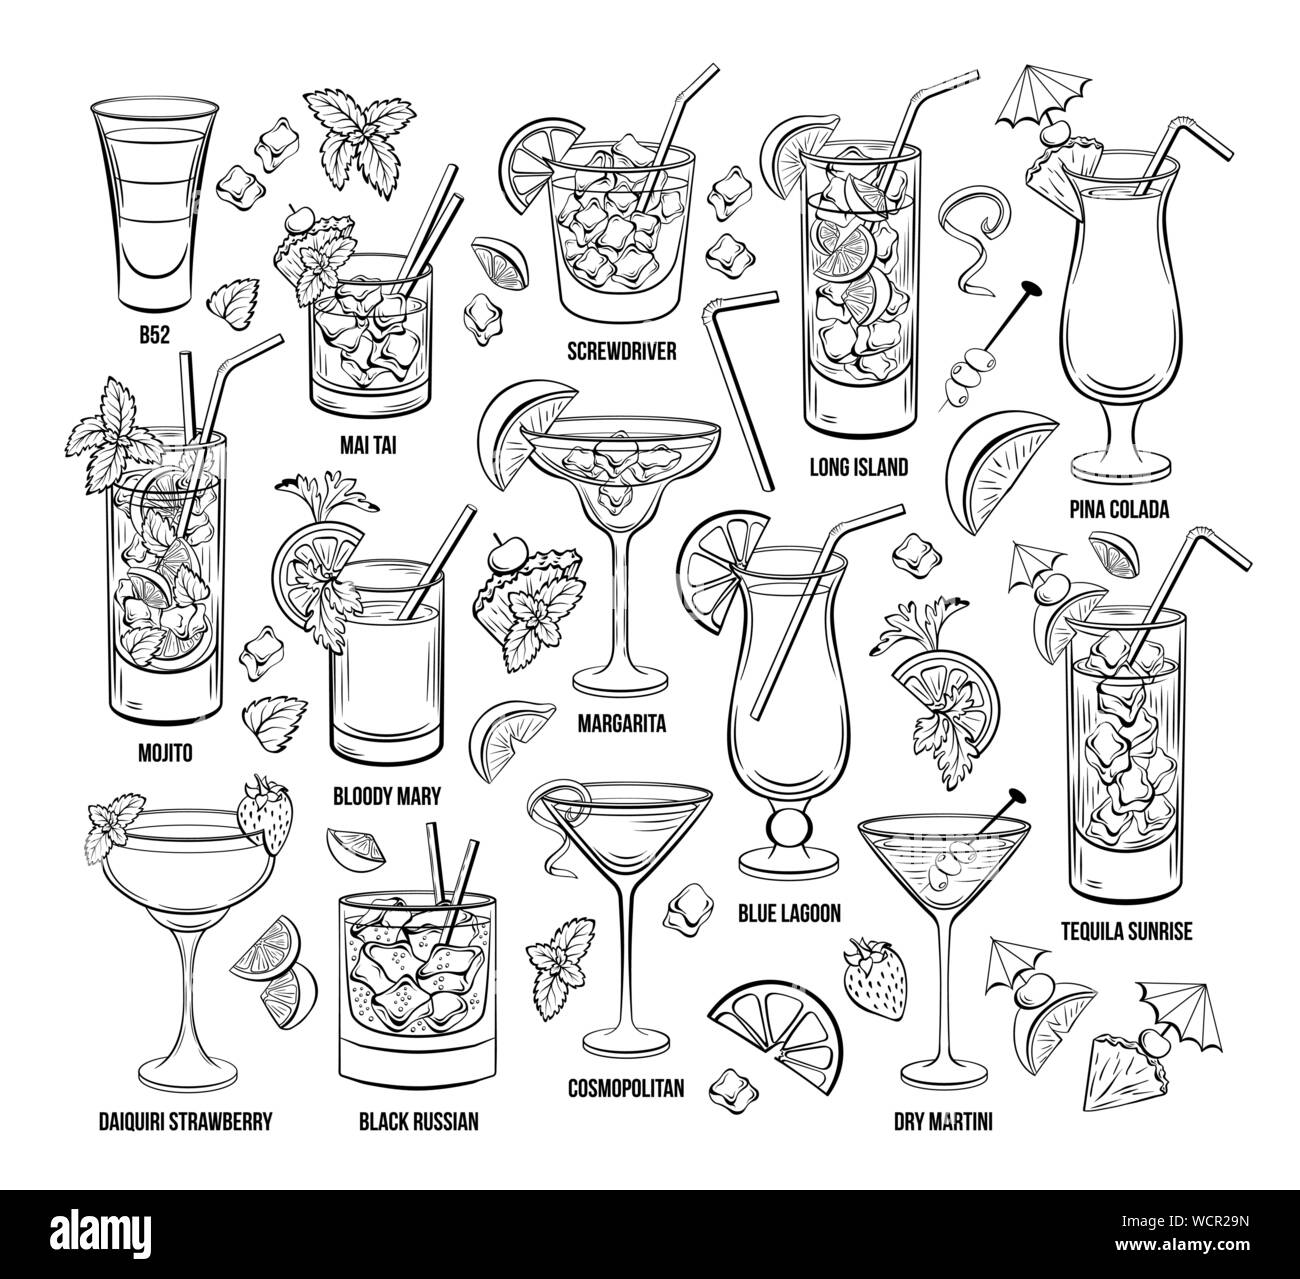 Summer Alcoholic Cocklails Set. Hand Drawn Beverages or Drinks. Engraving Menu or Poster for Beach Party vector illustration. Cosmopolitan, margarita, Pina Colada, Long island, Bloody Mary, mai tai Stock Vector